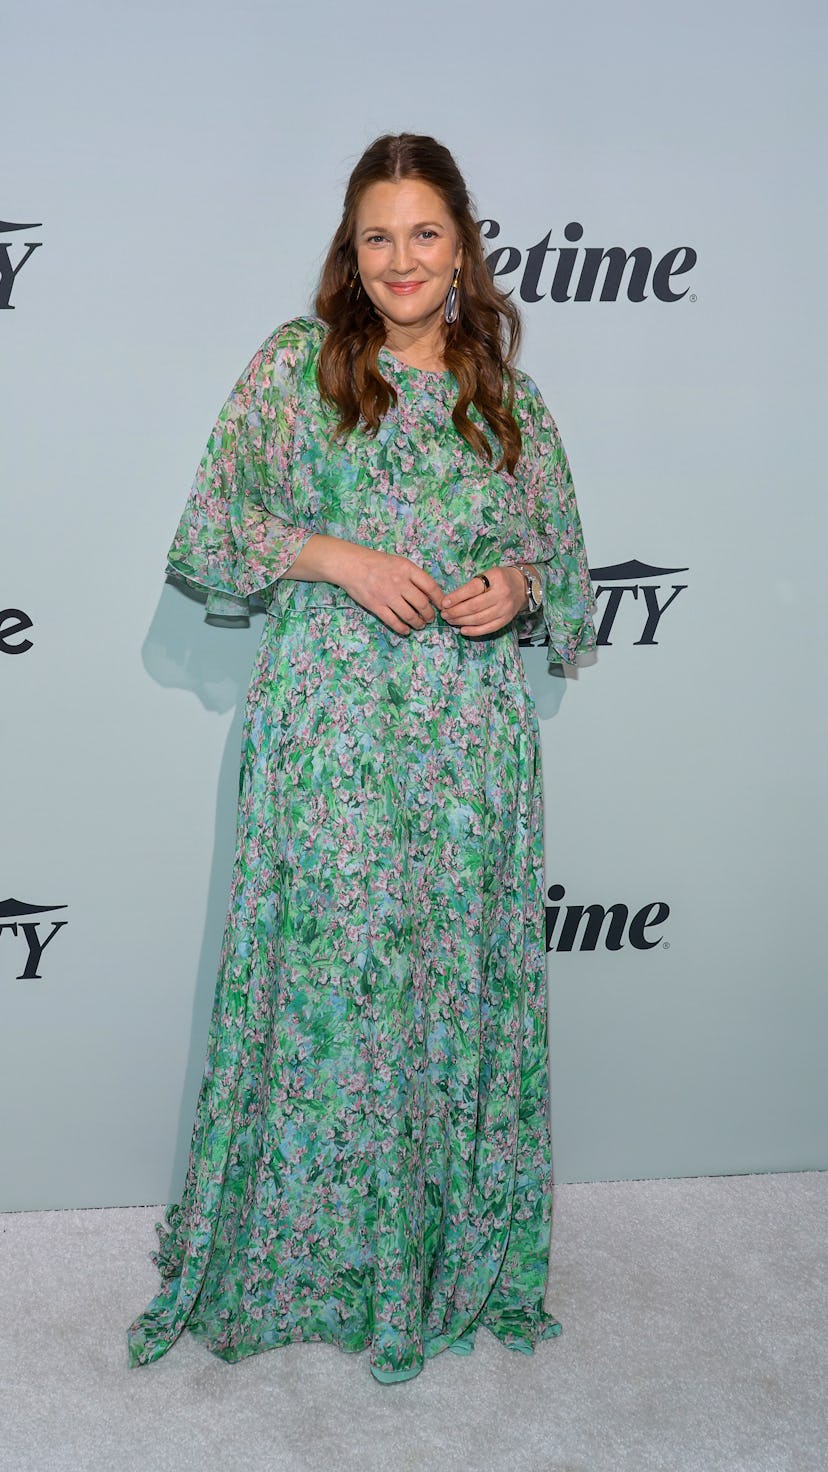 Drew Barrymore at Variety's 2022 Power of Women event